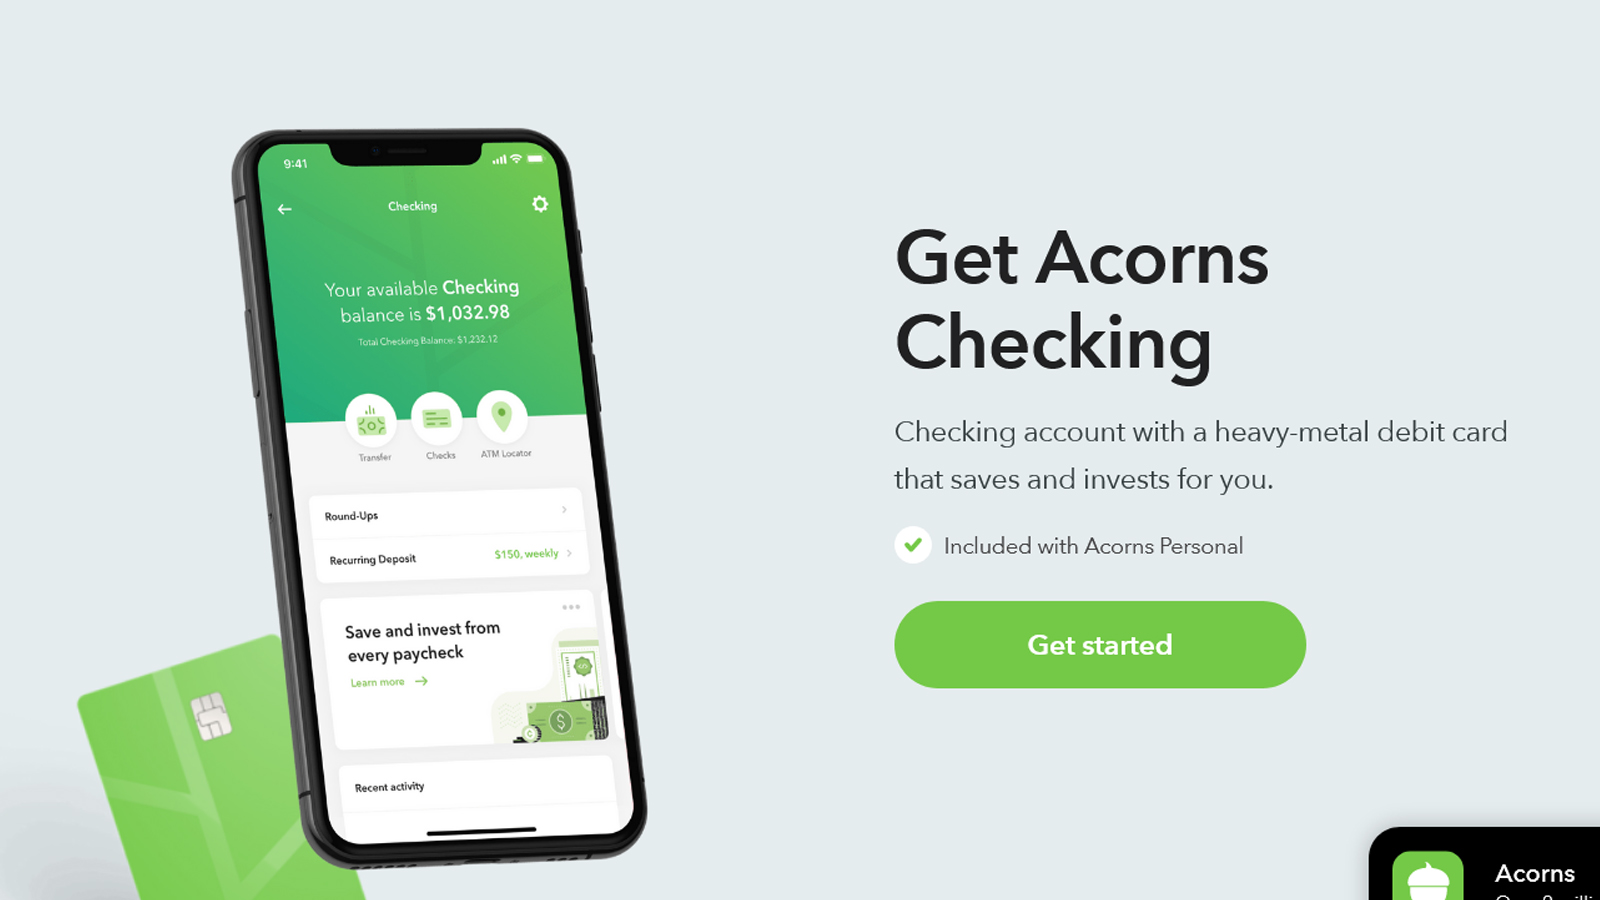 Find pricing, reviews and other details about Acorns